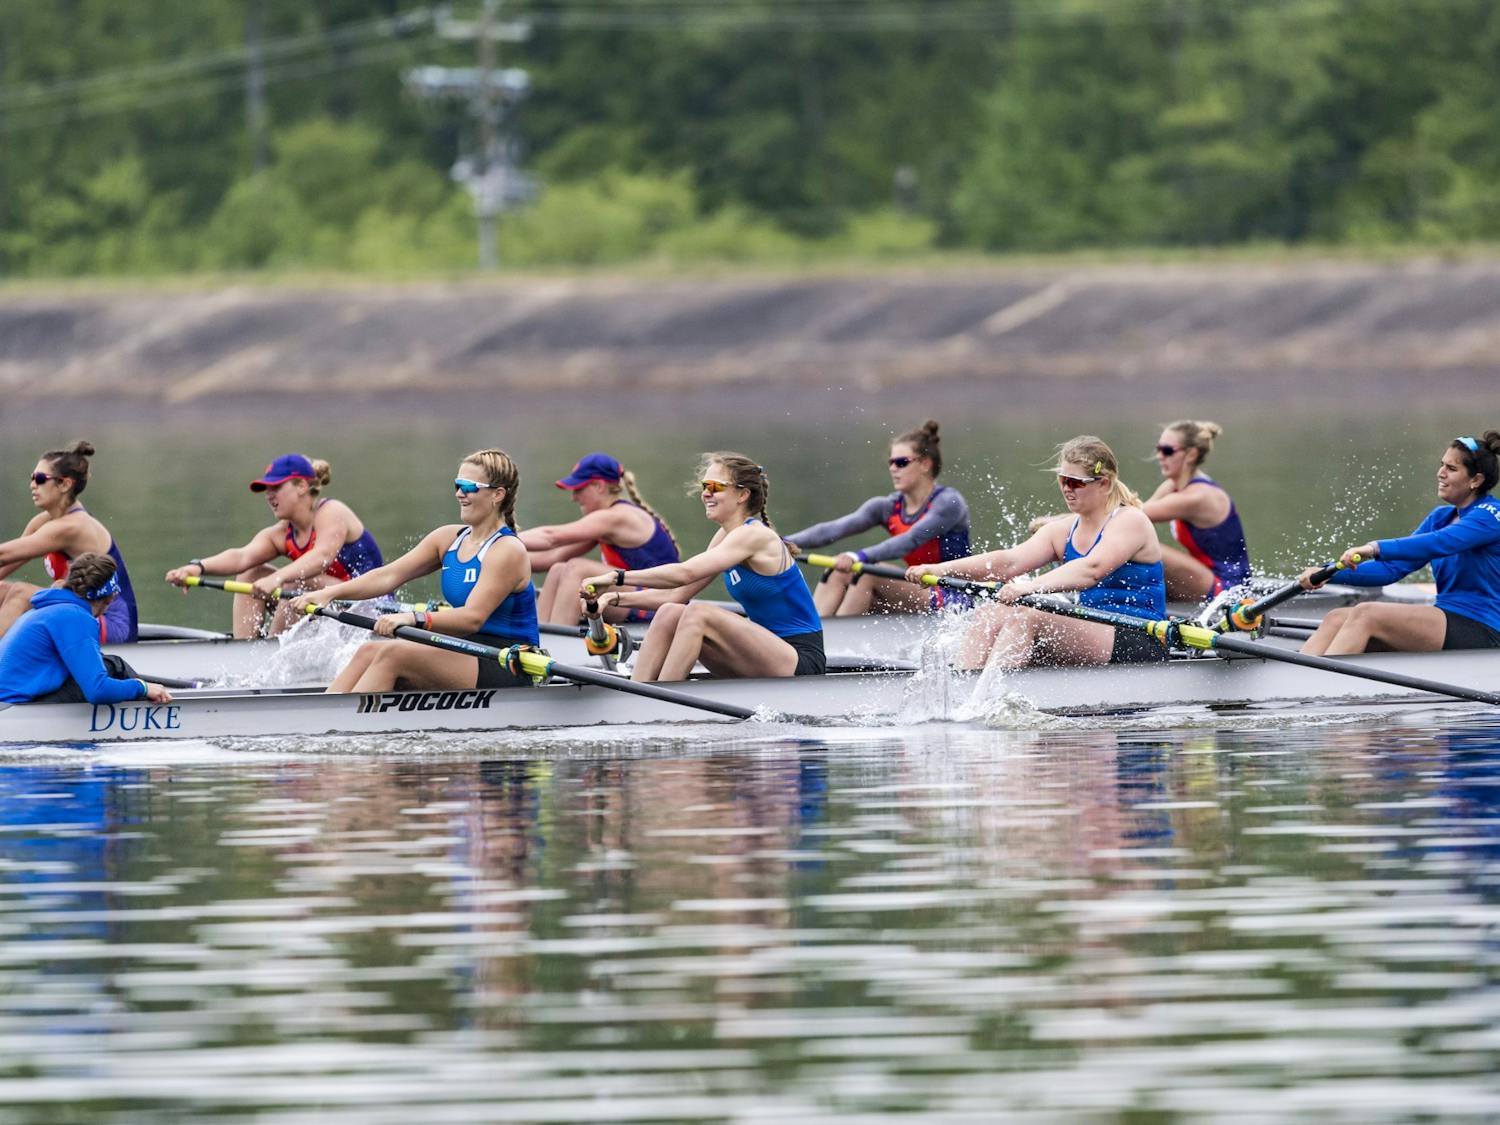 Duke found itself in a back-and-forth battle with Clemson for both days of the Lake Wheeler Invitational.